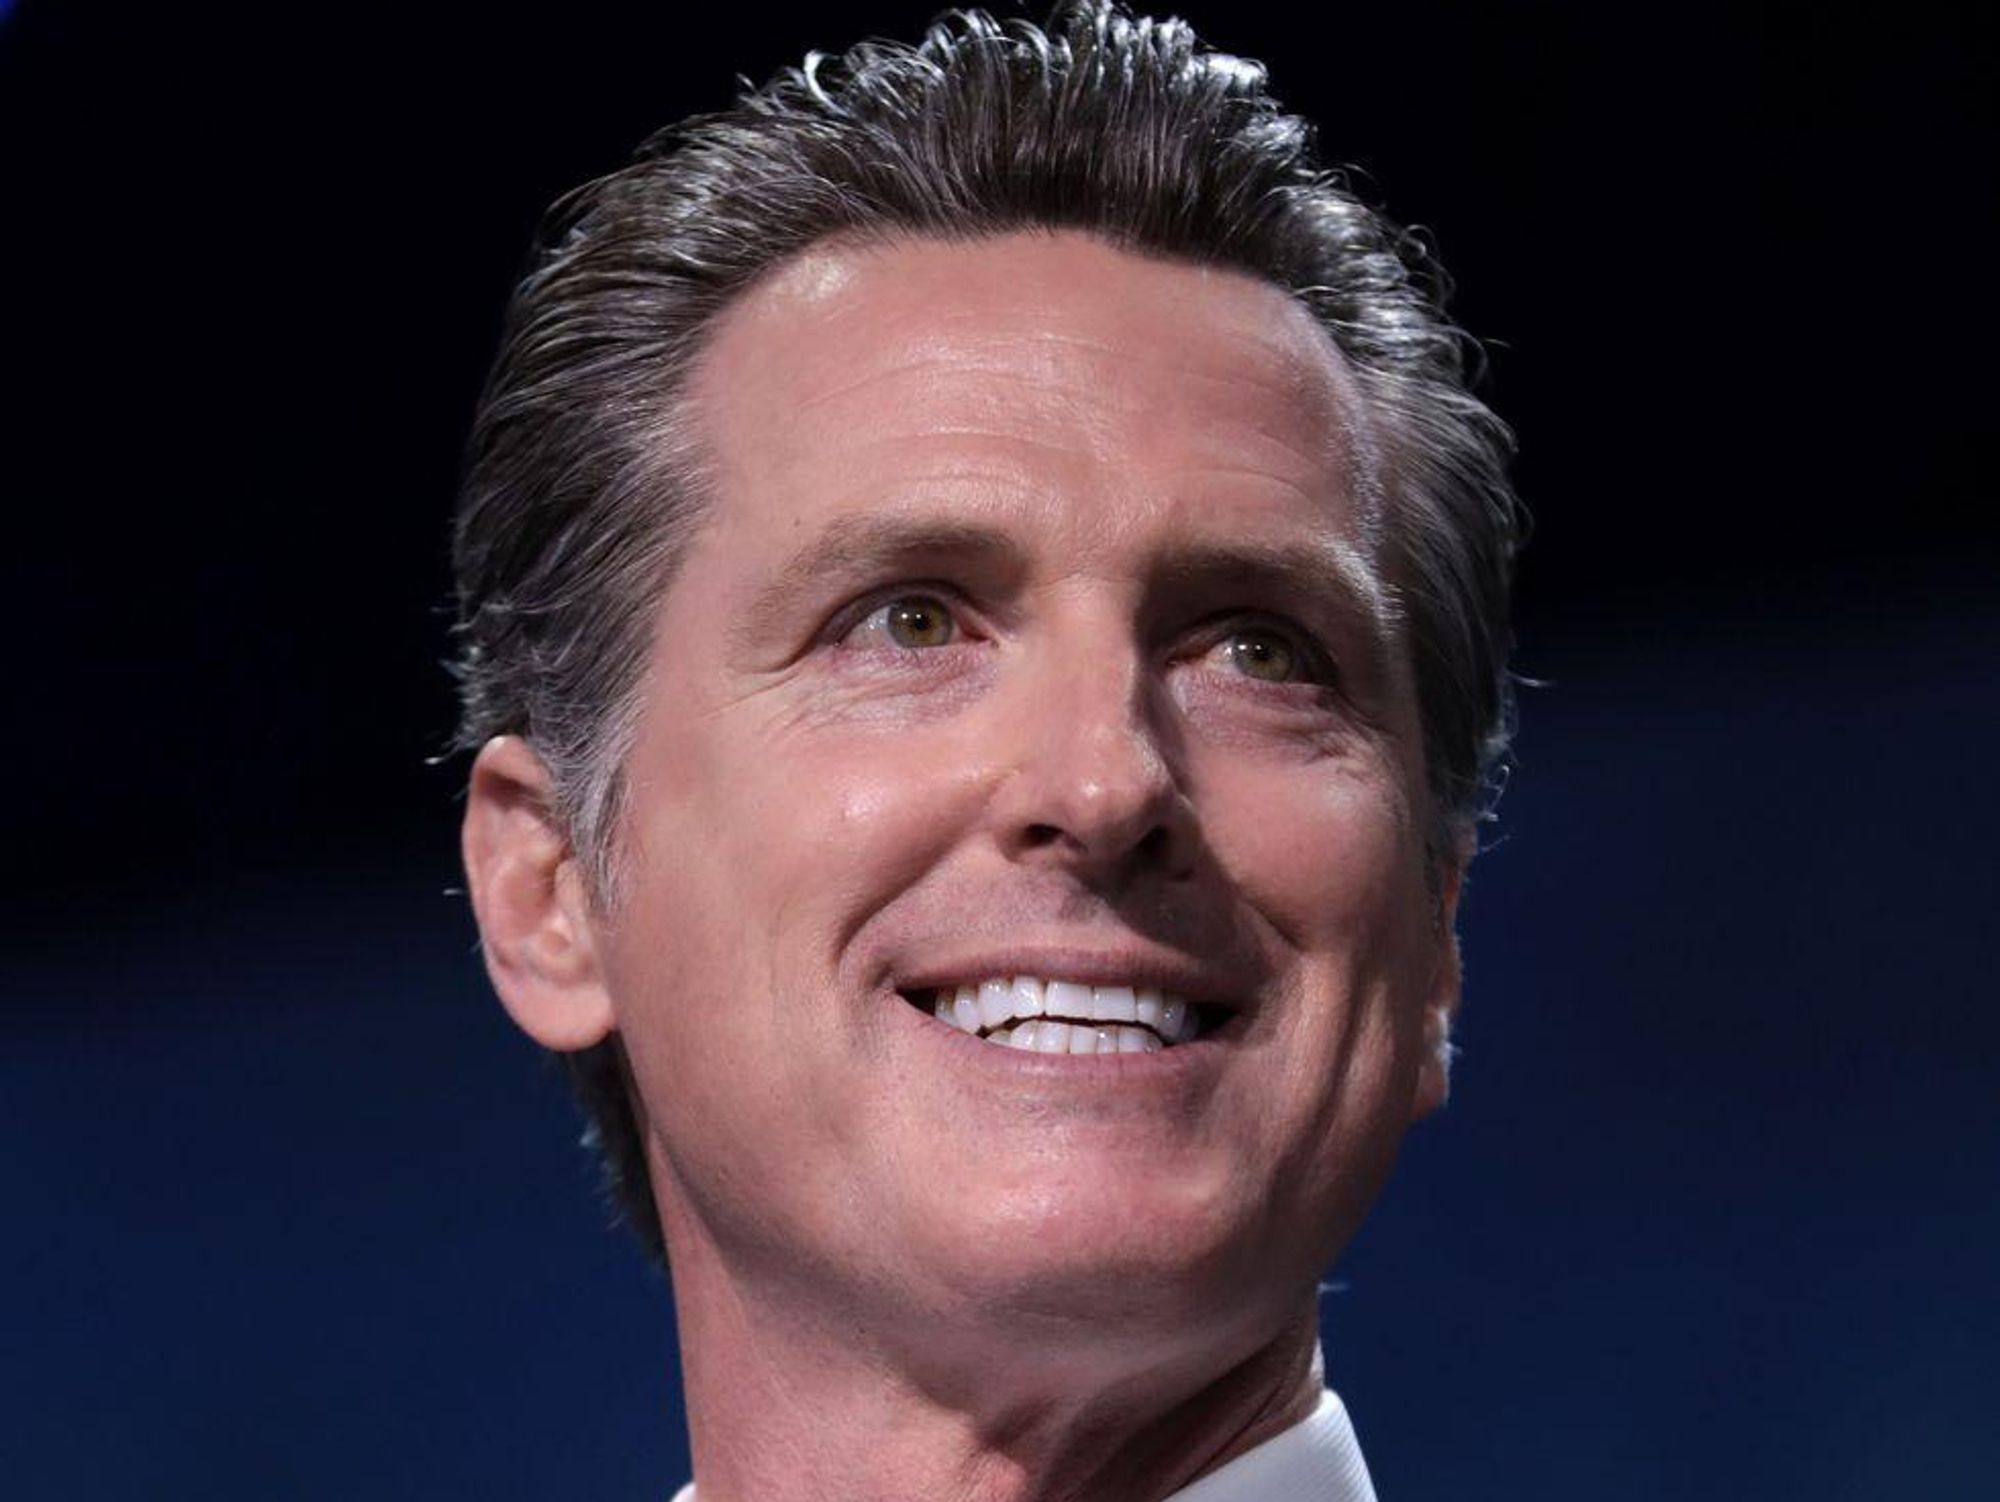 Gavin Newsom Beat the Recall. Here's What That Means for Big Tech